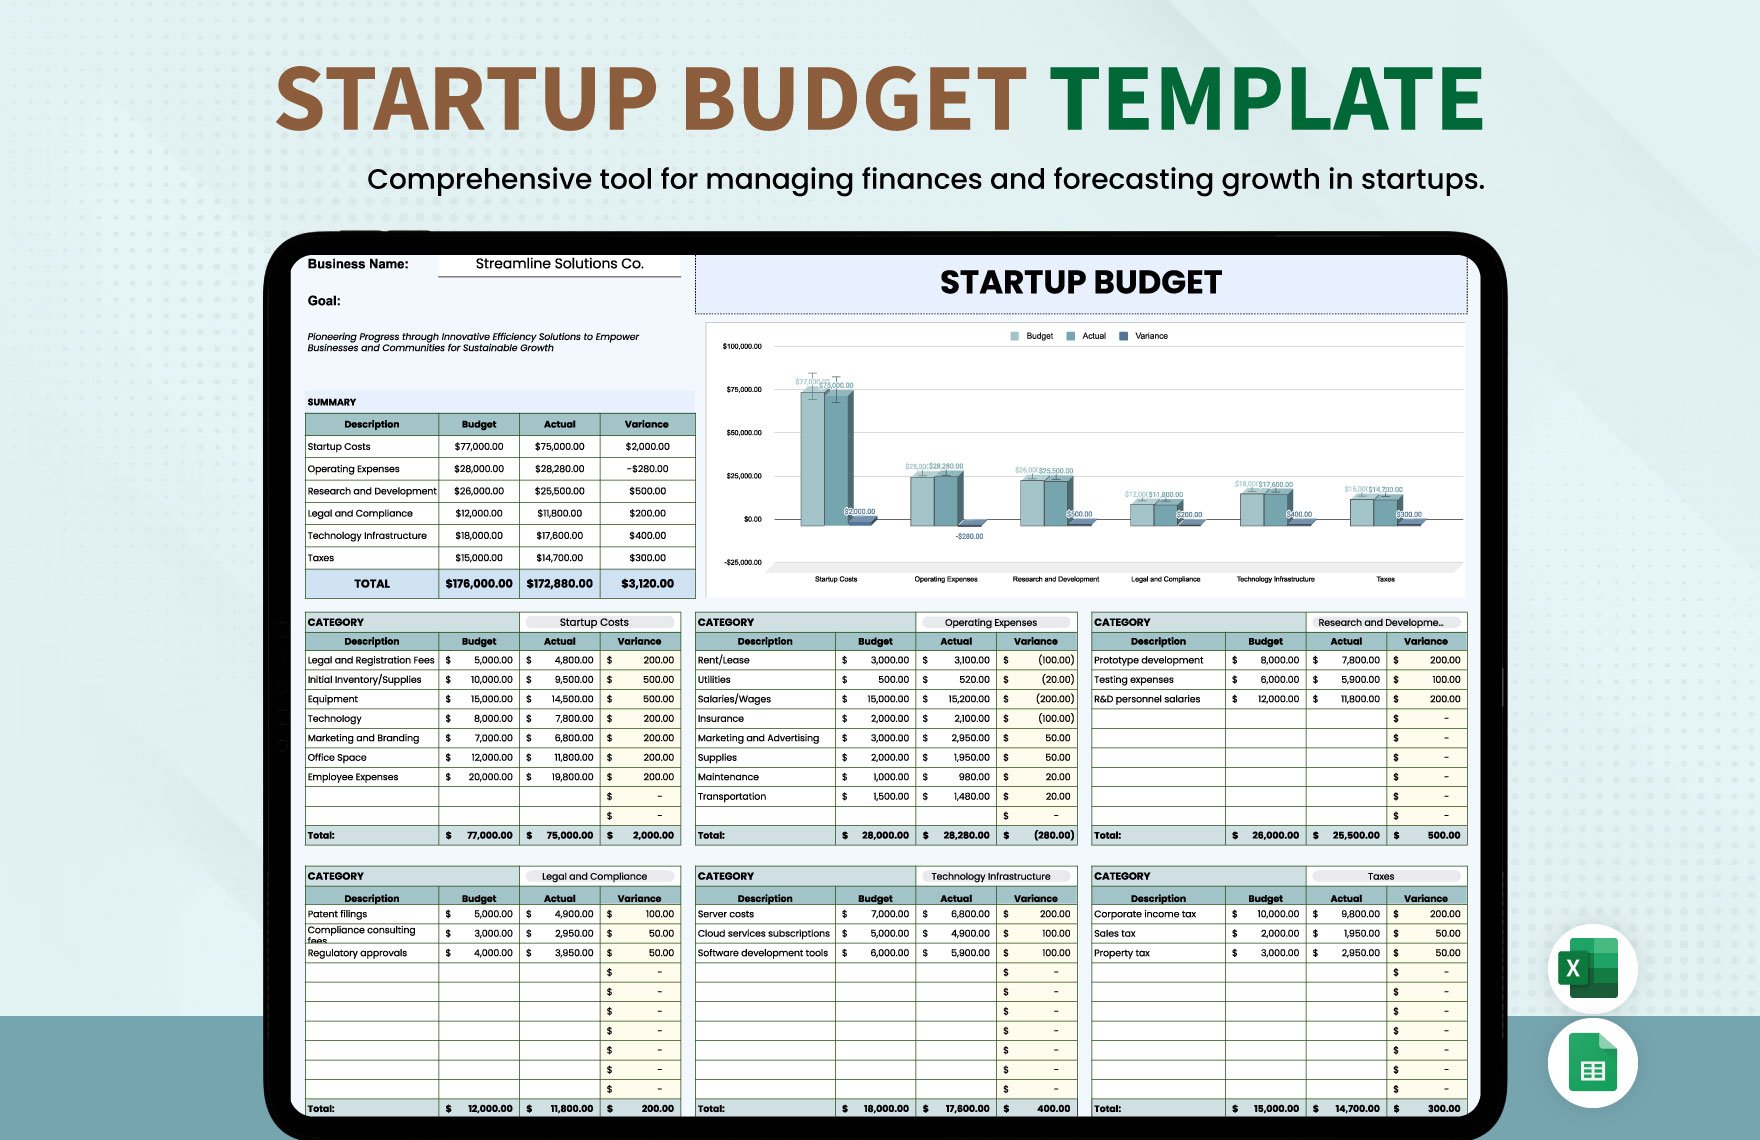 Startup Budget Template in Excel, Google Sheets